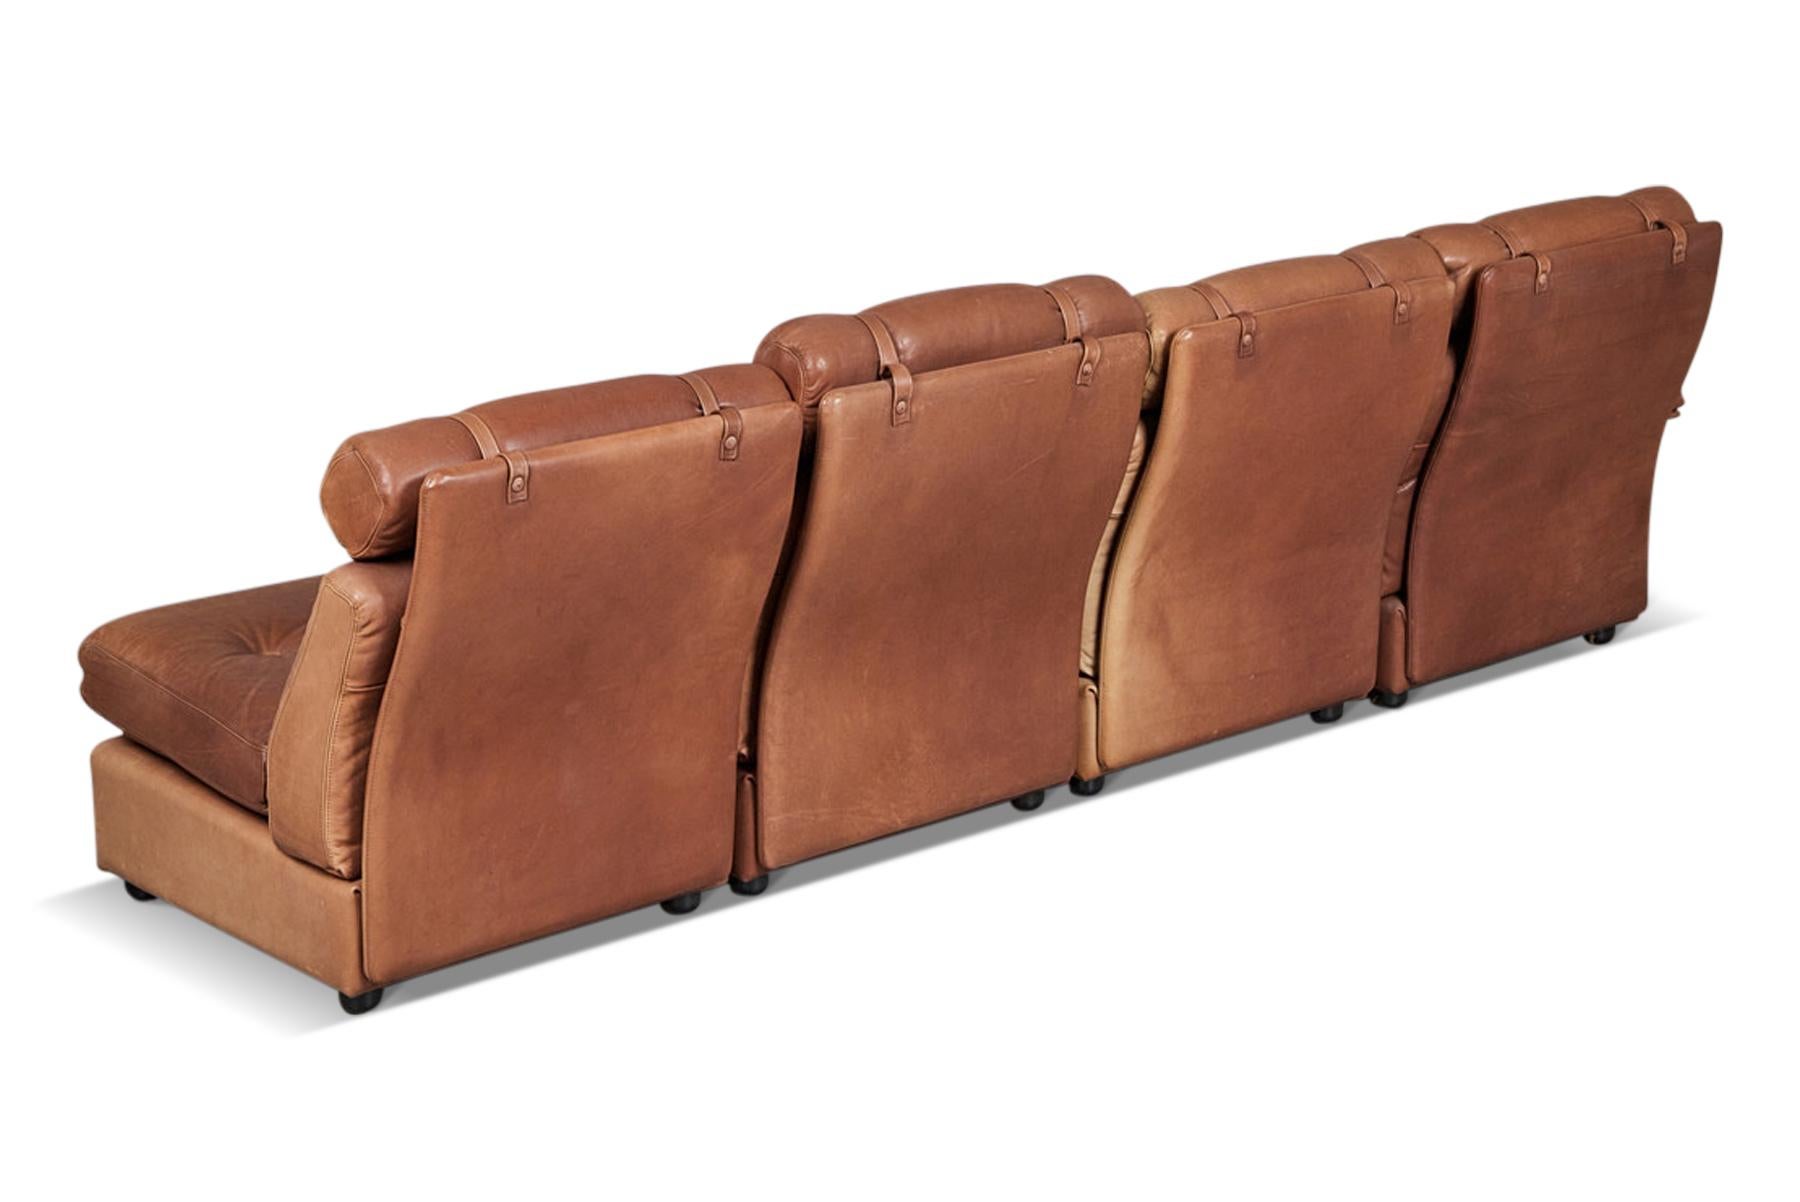 20th Century 1970s Highback Leather Sectional Sofa in Cognac Buffalo Leather For Sale